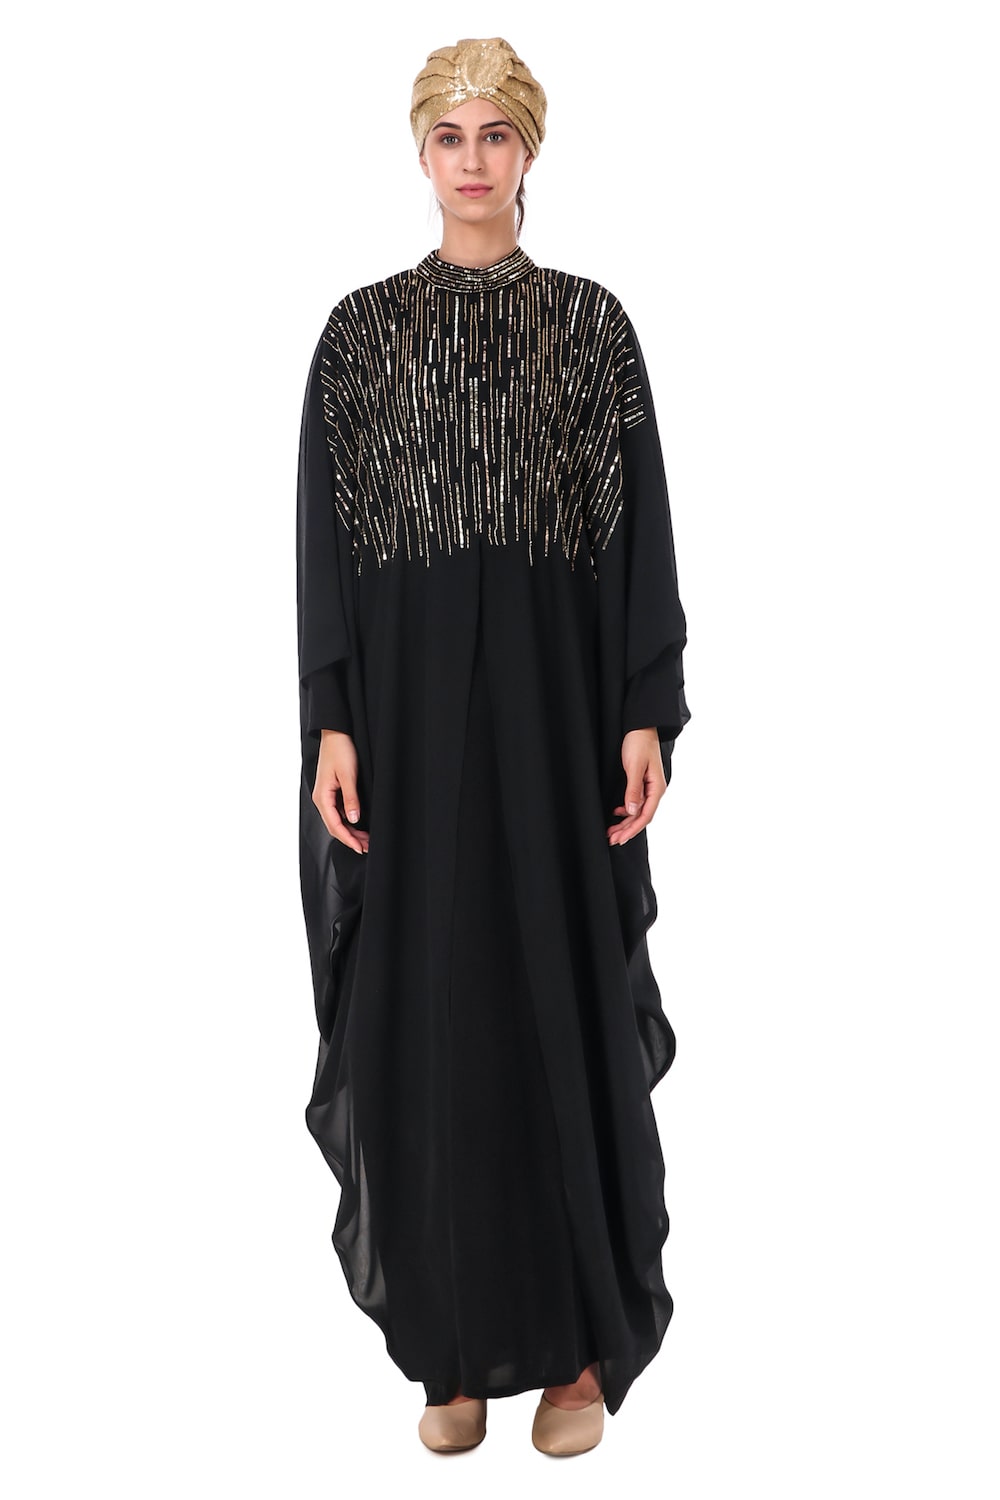 Tulip Cut Eid Kaftan Style Abaya Hand Embroidered With Beads And Sequence